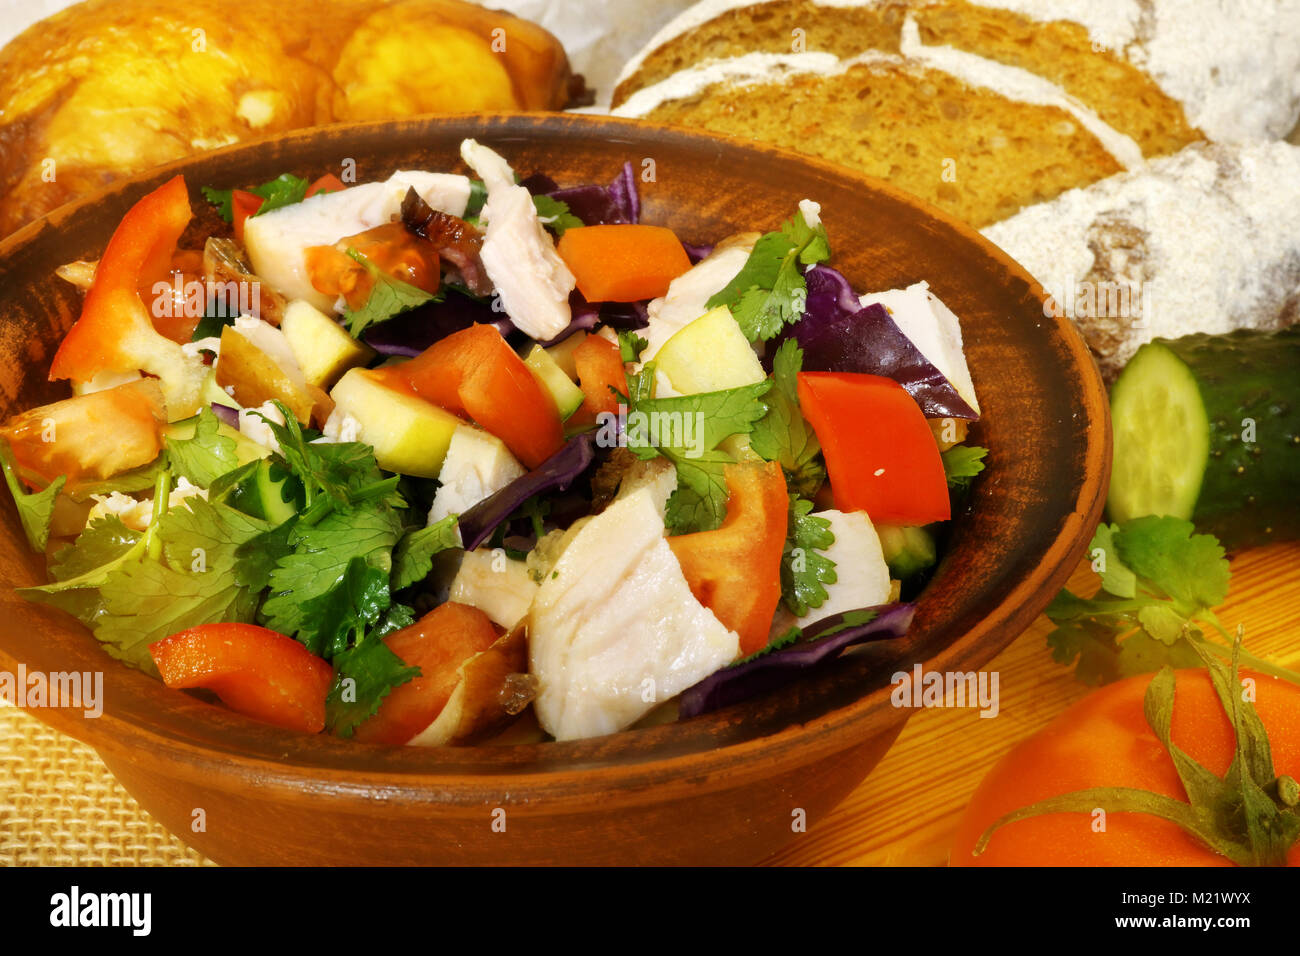 Healthy food. Ceramic bowl with salad with fresh vegetables and chicken. Rural kitchen table. Stock Photo